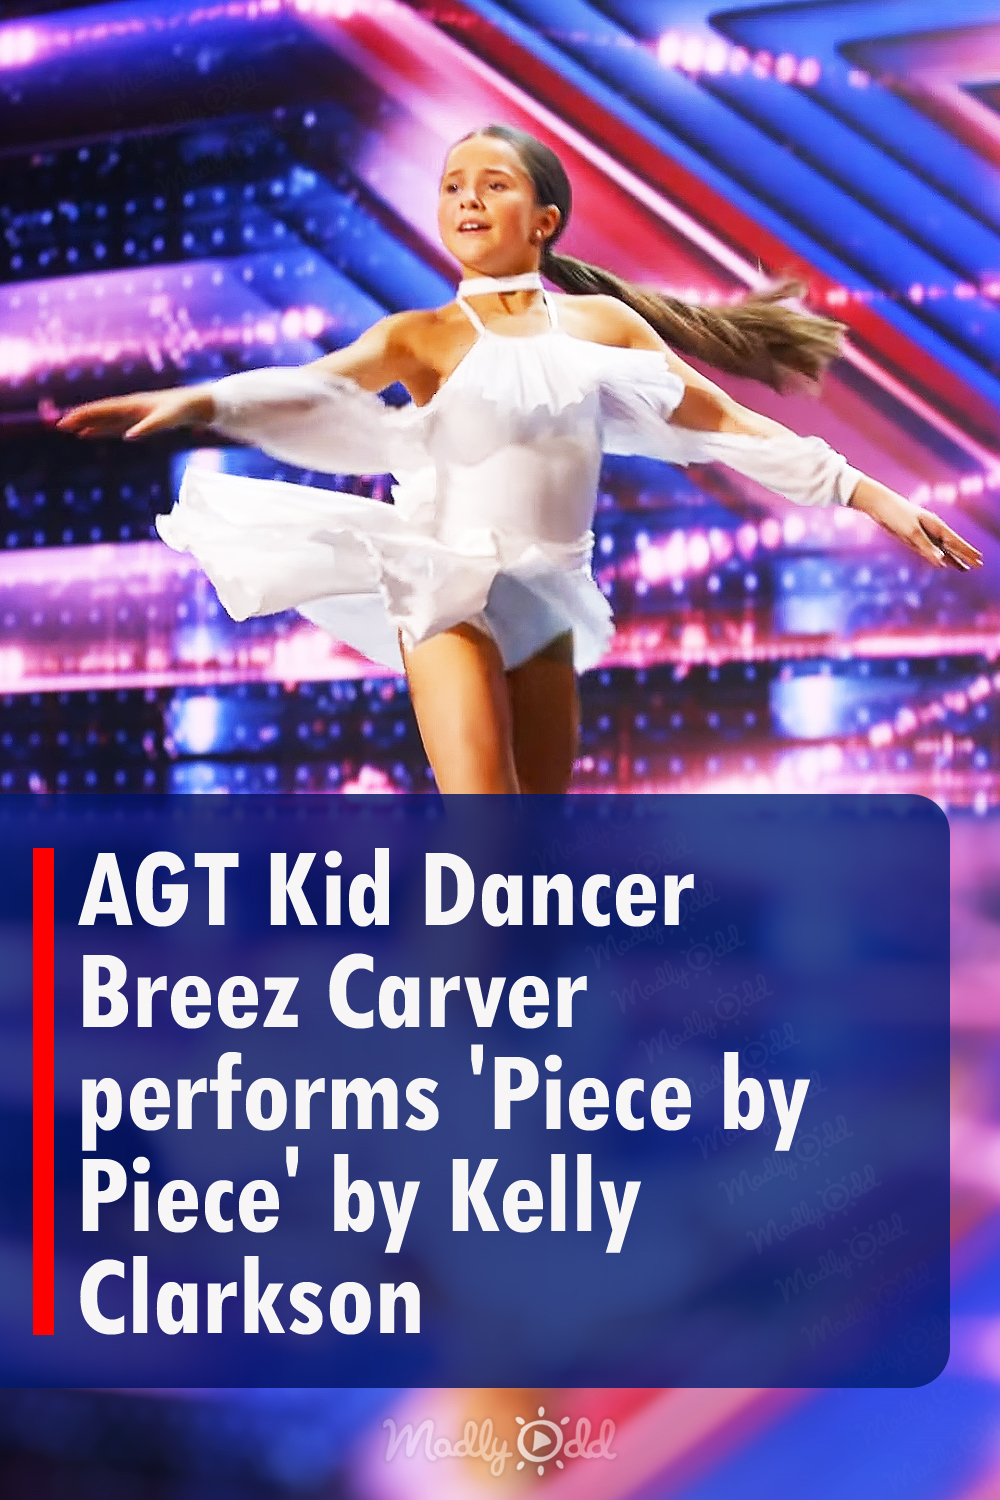 AGT Kid Dancer Breez Carver performs \'Piece by Piece\' by Kelly Clarkson